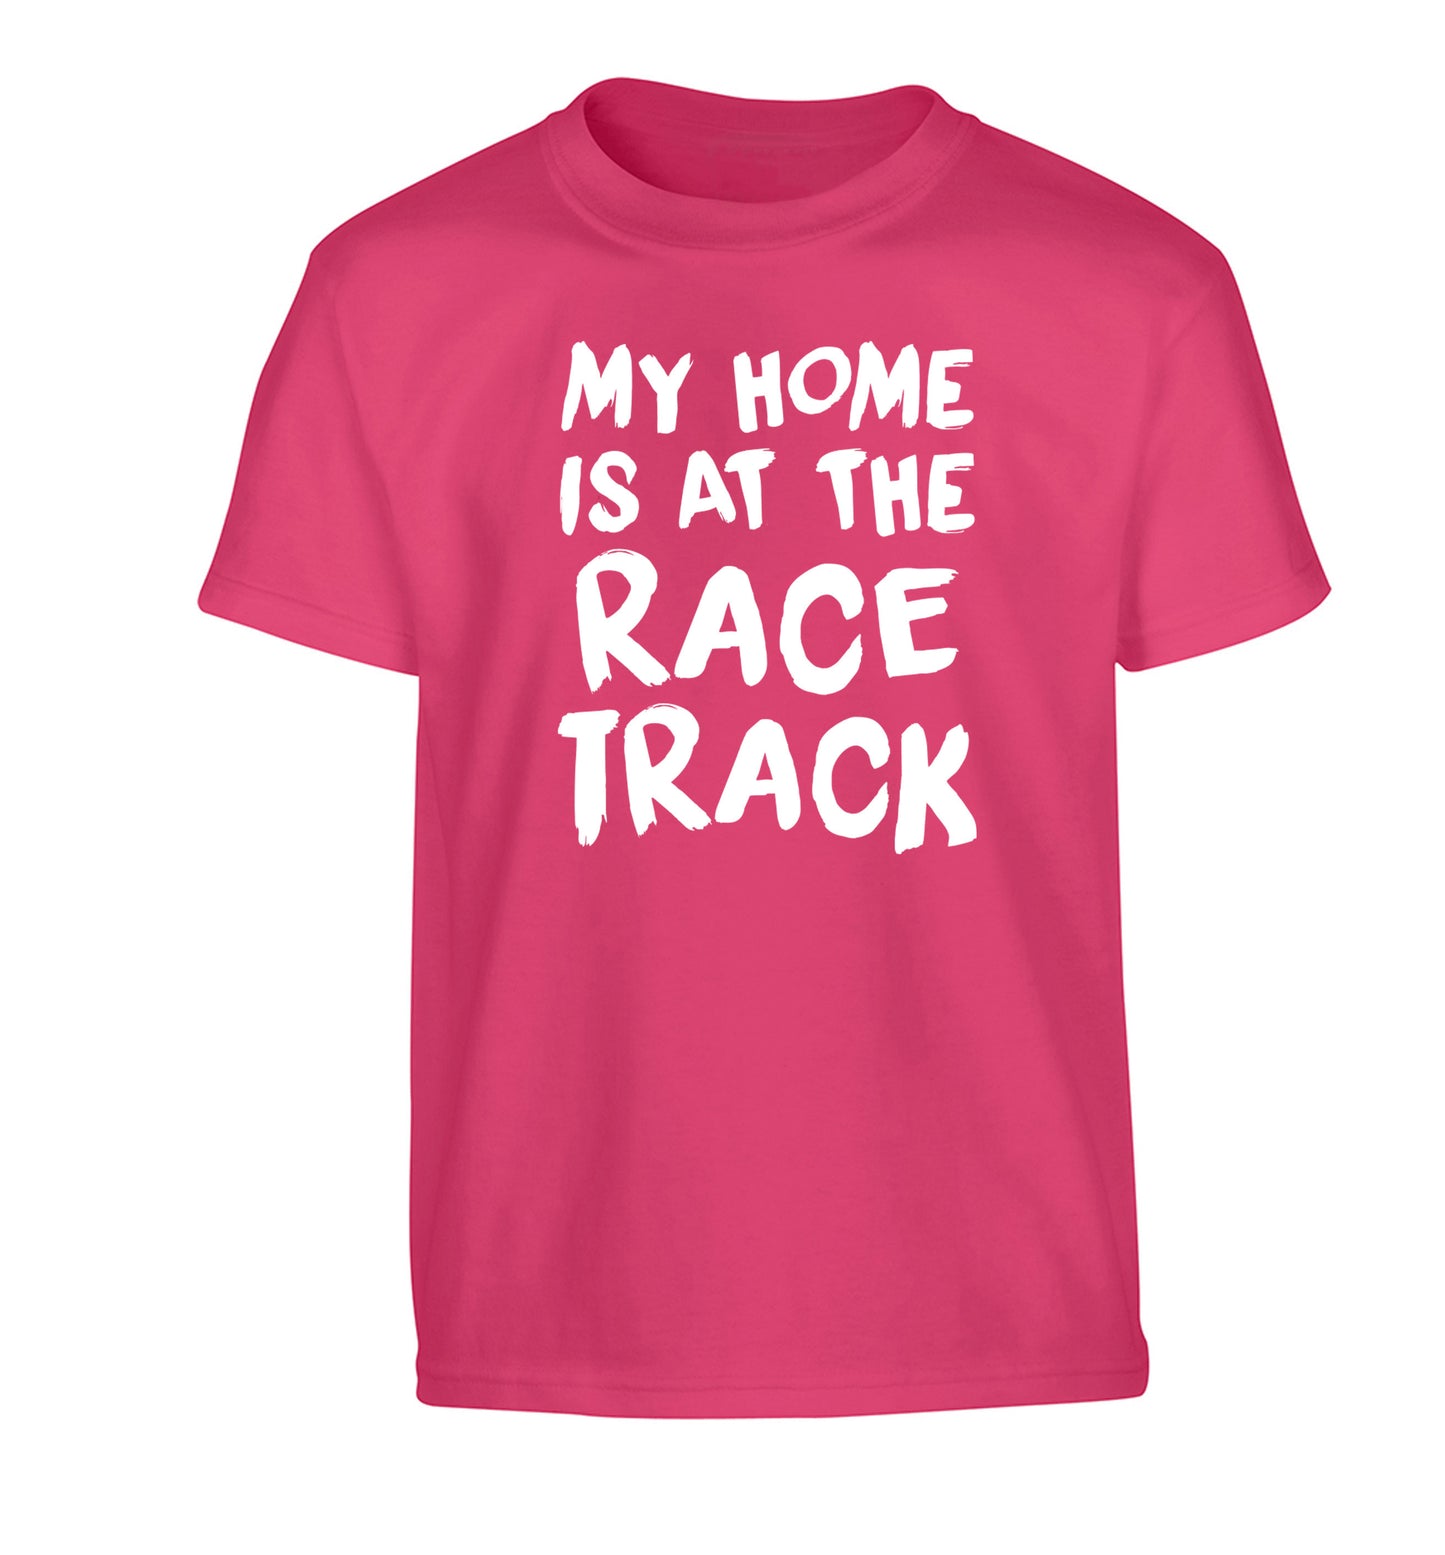 My home is at the race track Children's pink Tshirt 12-14 Years